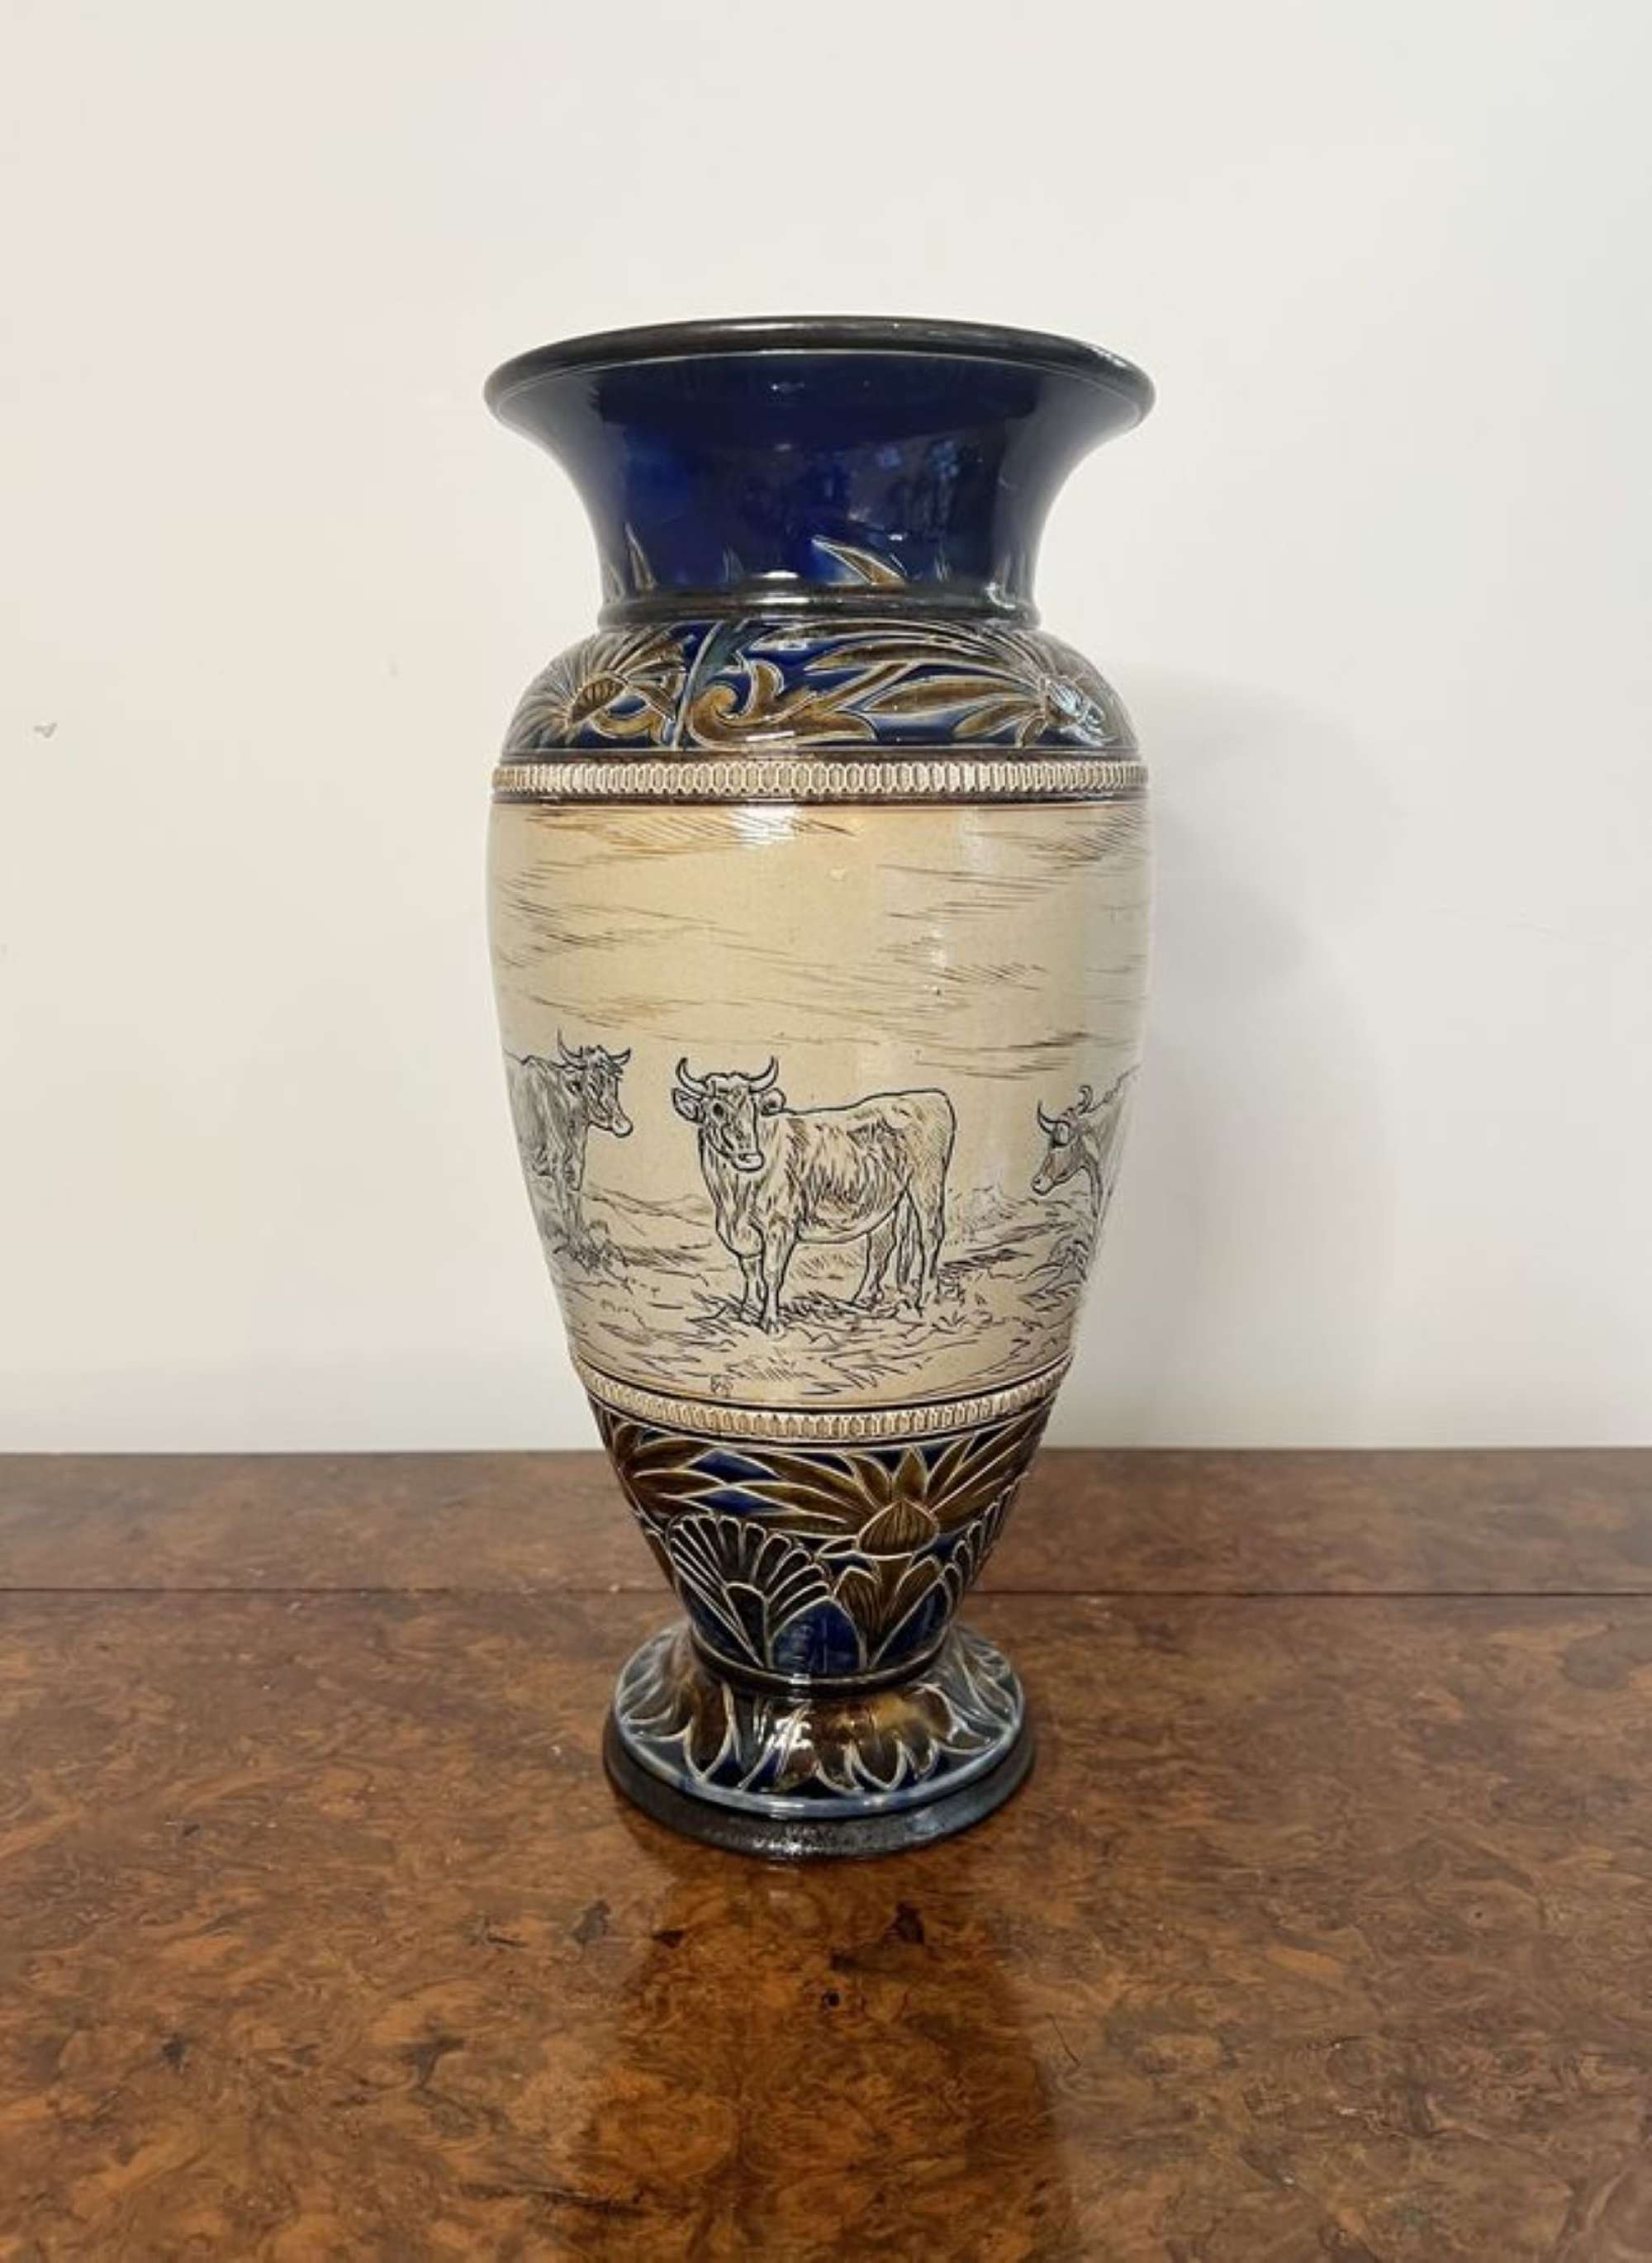 Outstanding quality large antique Doulton Lambeth vase by Hannah Barlow